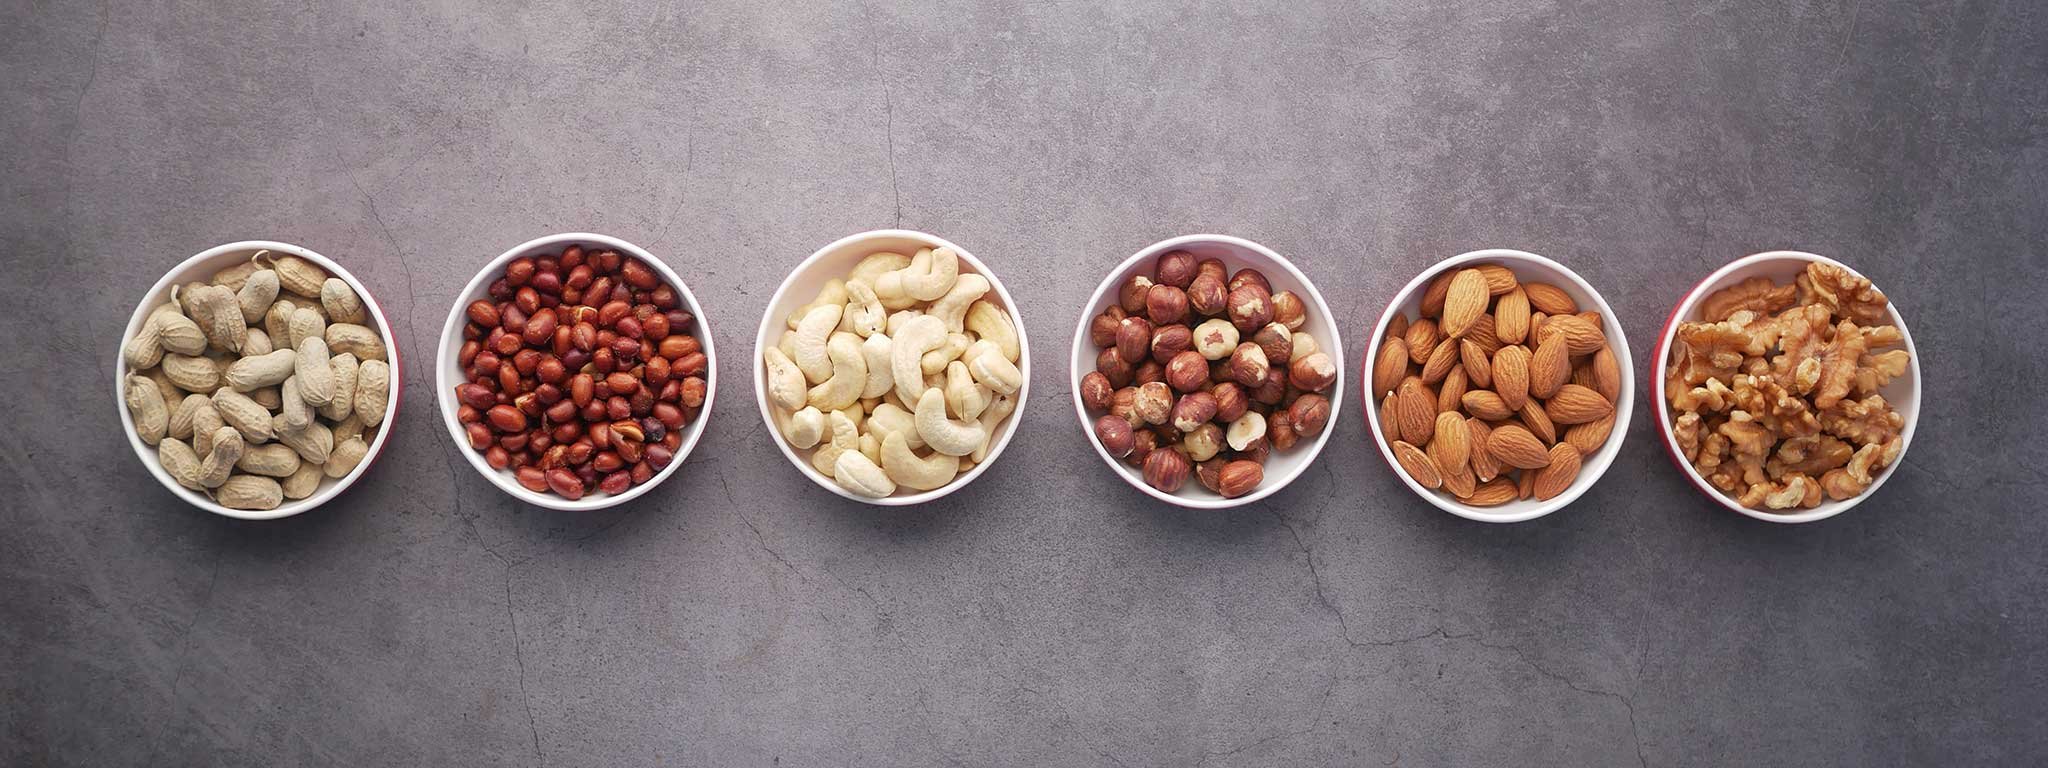 Why we love nuts